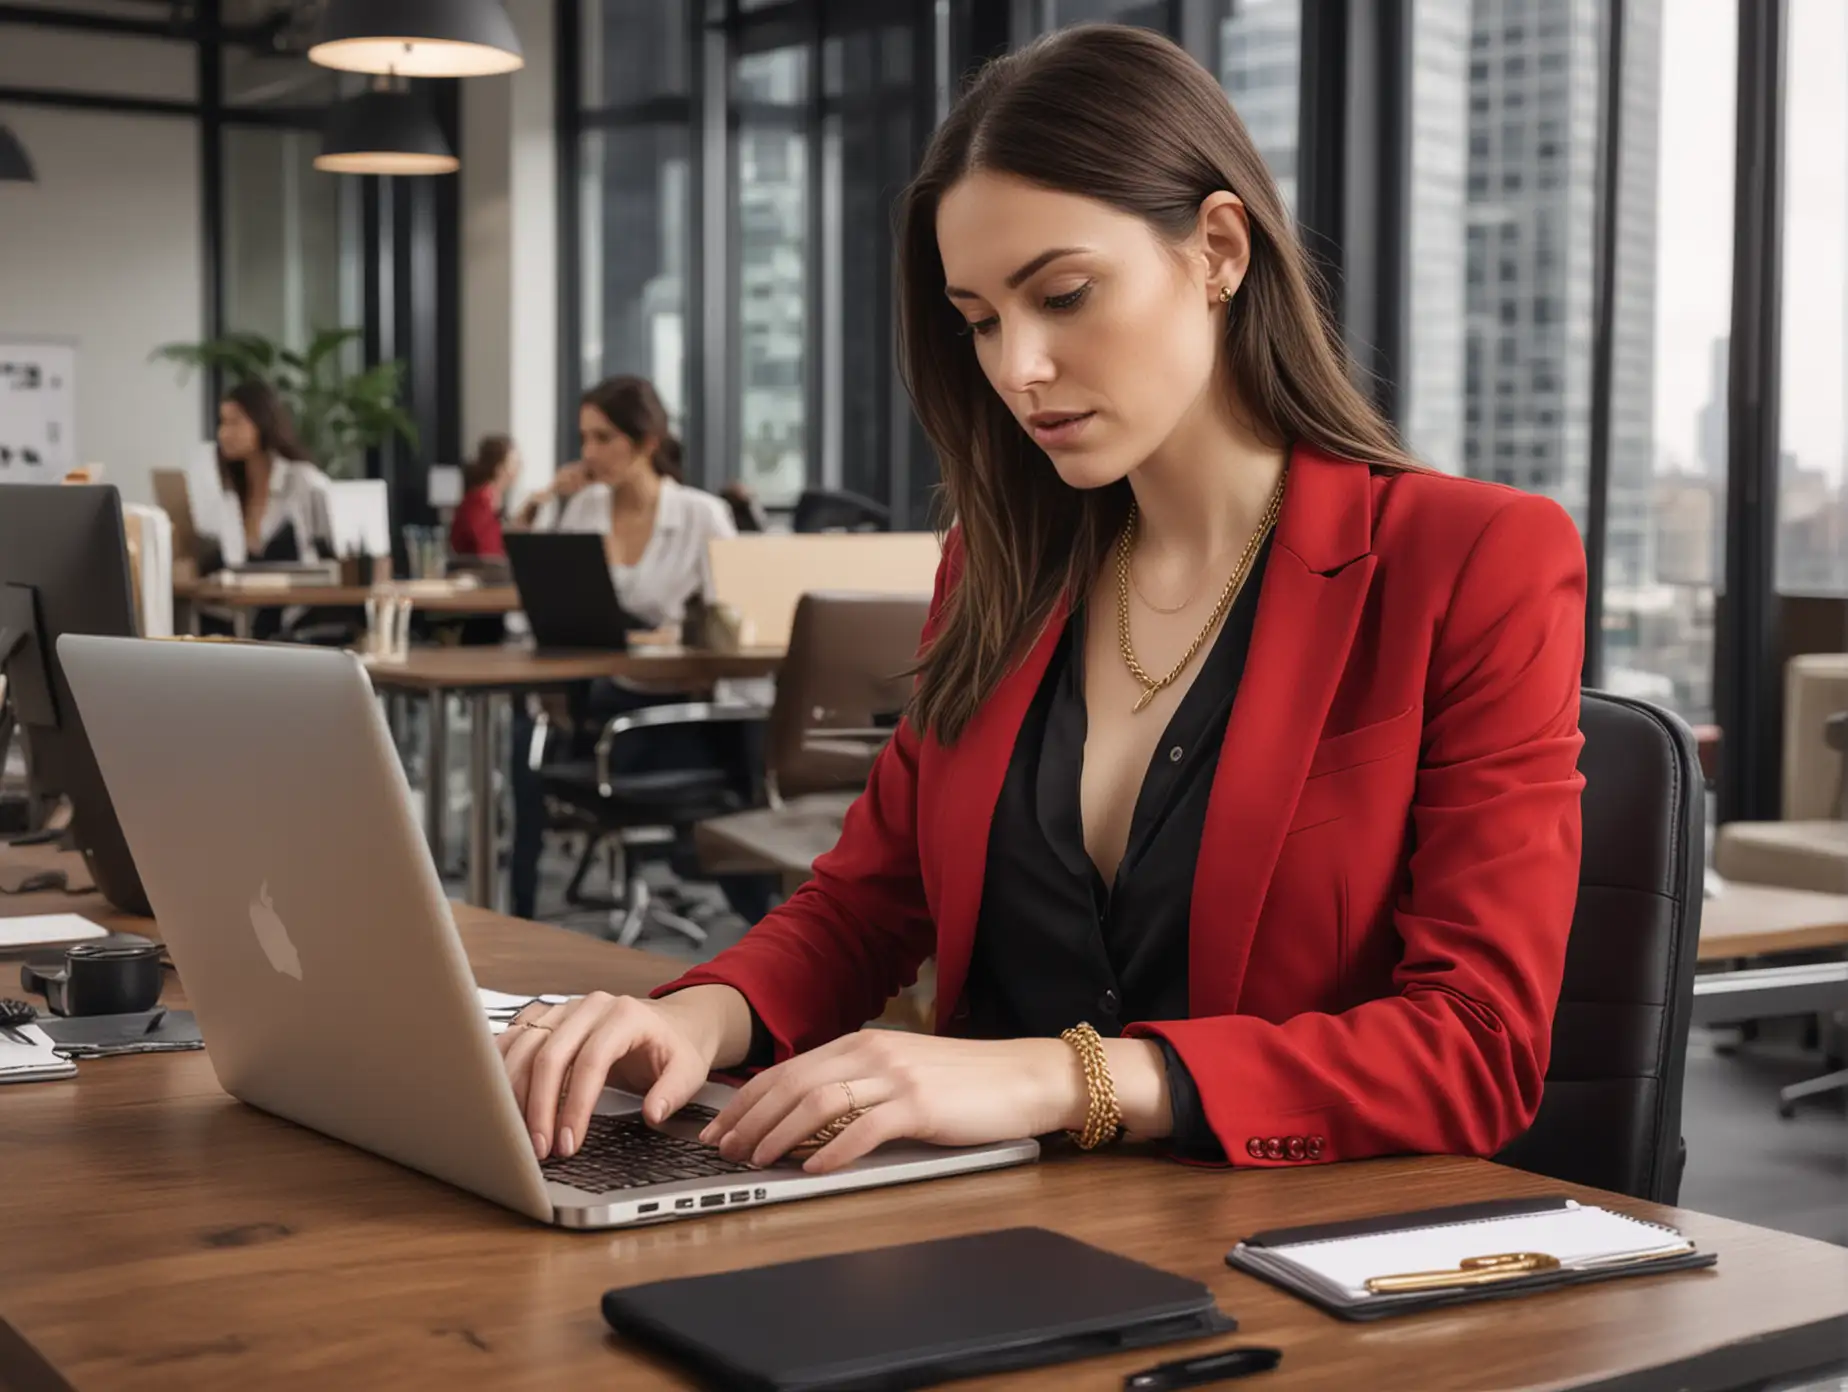 30 year old pale white woman, long dark brown hair parted to the right and a gold necklace. She is wearing a red blazer with black shirt and black trousers, sitting at a desk typing, looking down on unbranded laptop, crowded and busy high rise urban office setting